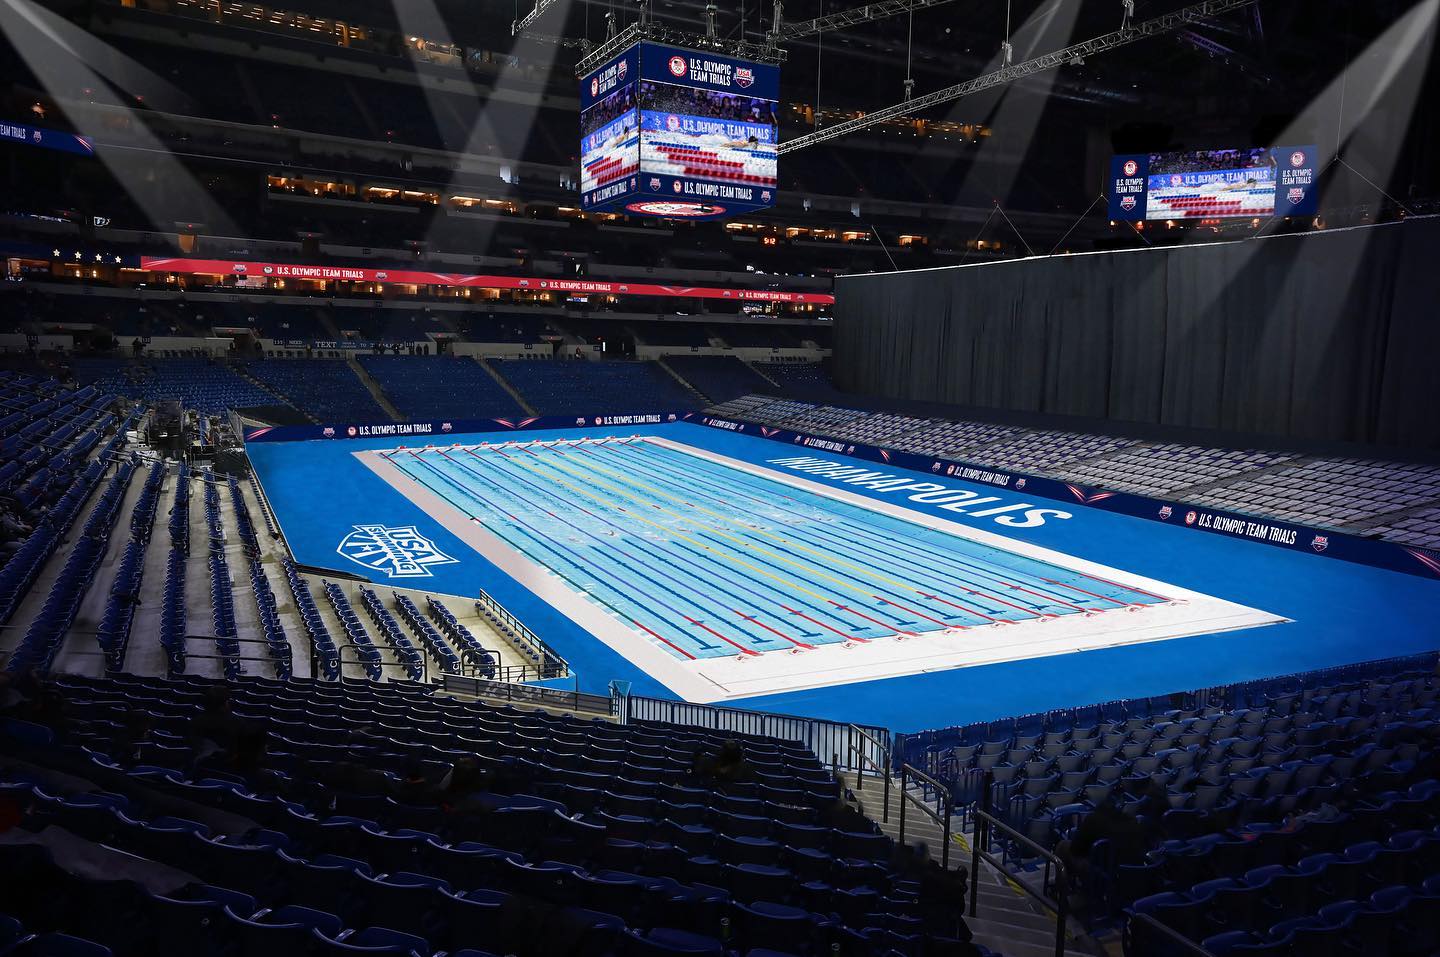 USA Swimming releases renderings for the 2024 US Olympic Trials venue